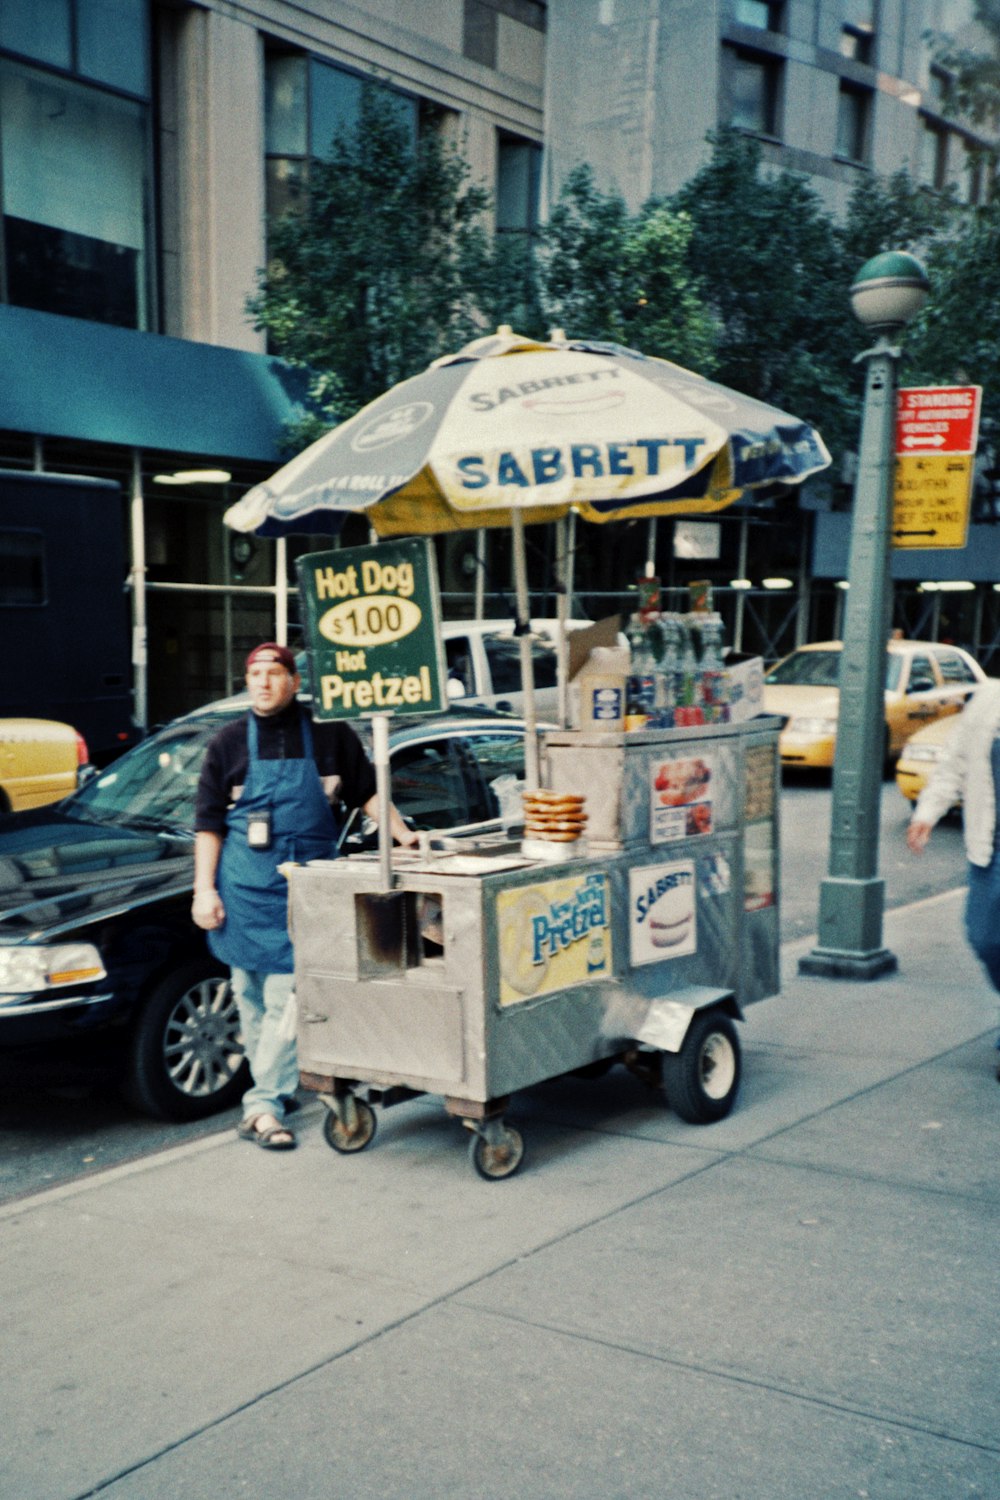 man in blue t-shirt and blue denim jeans standing beside food cart